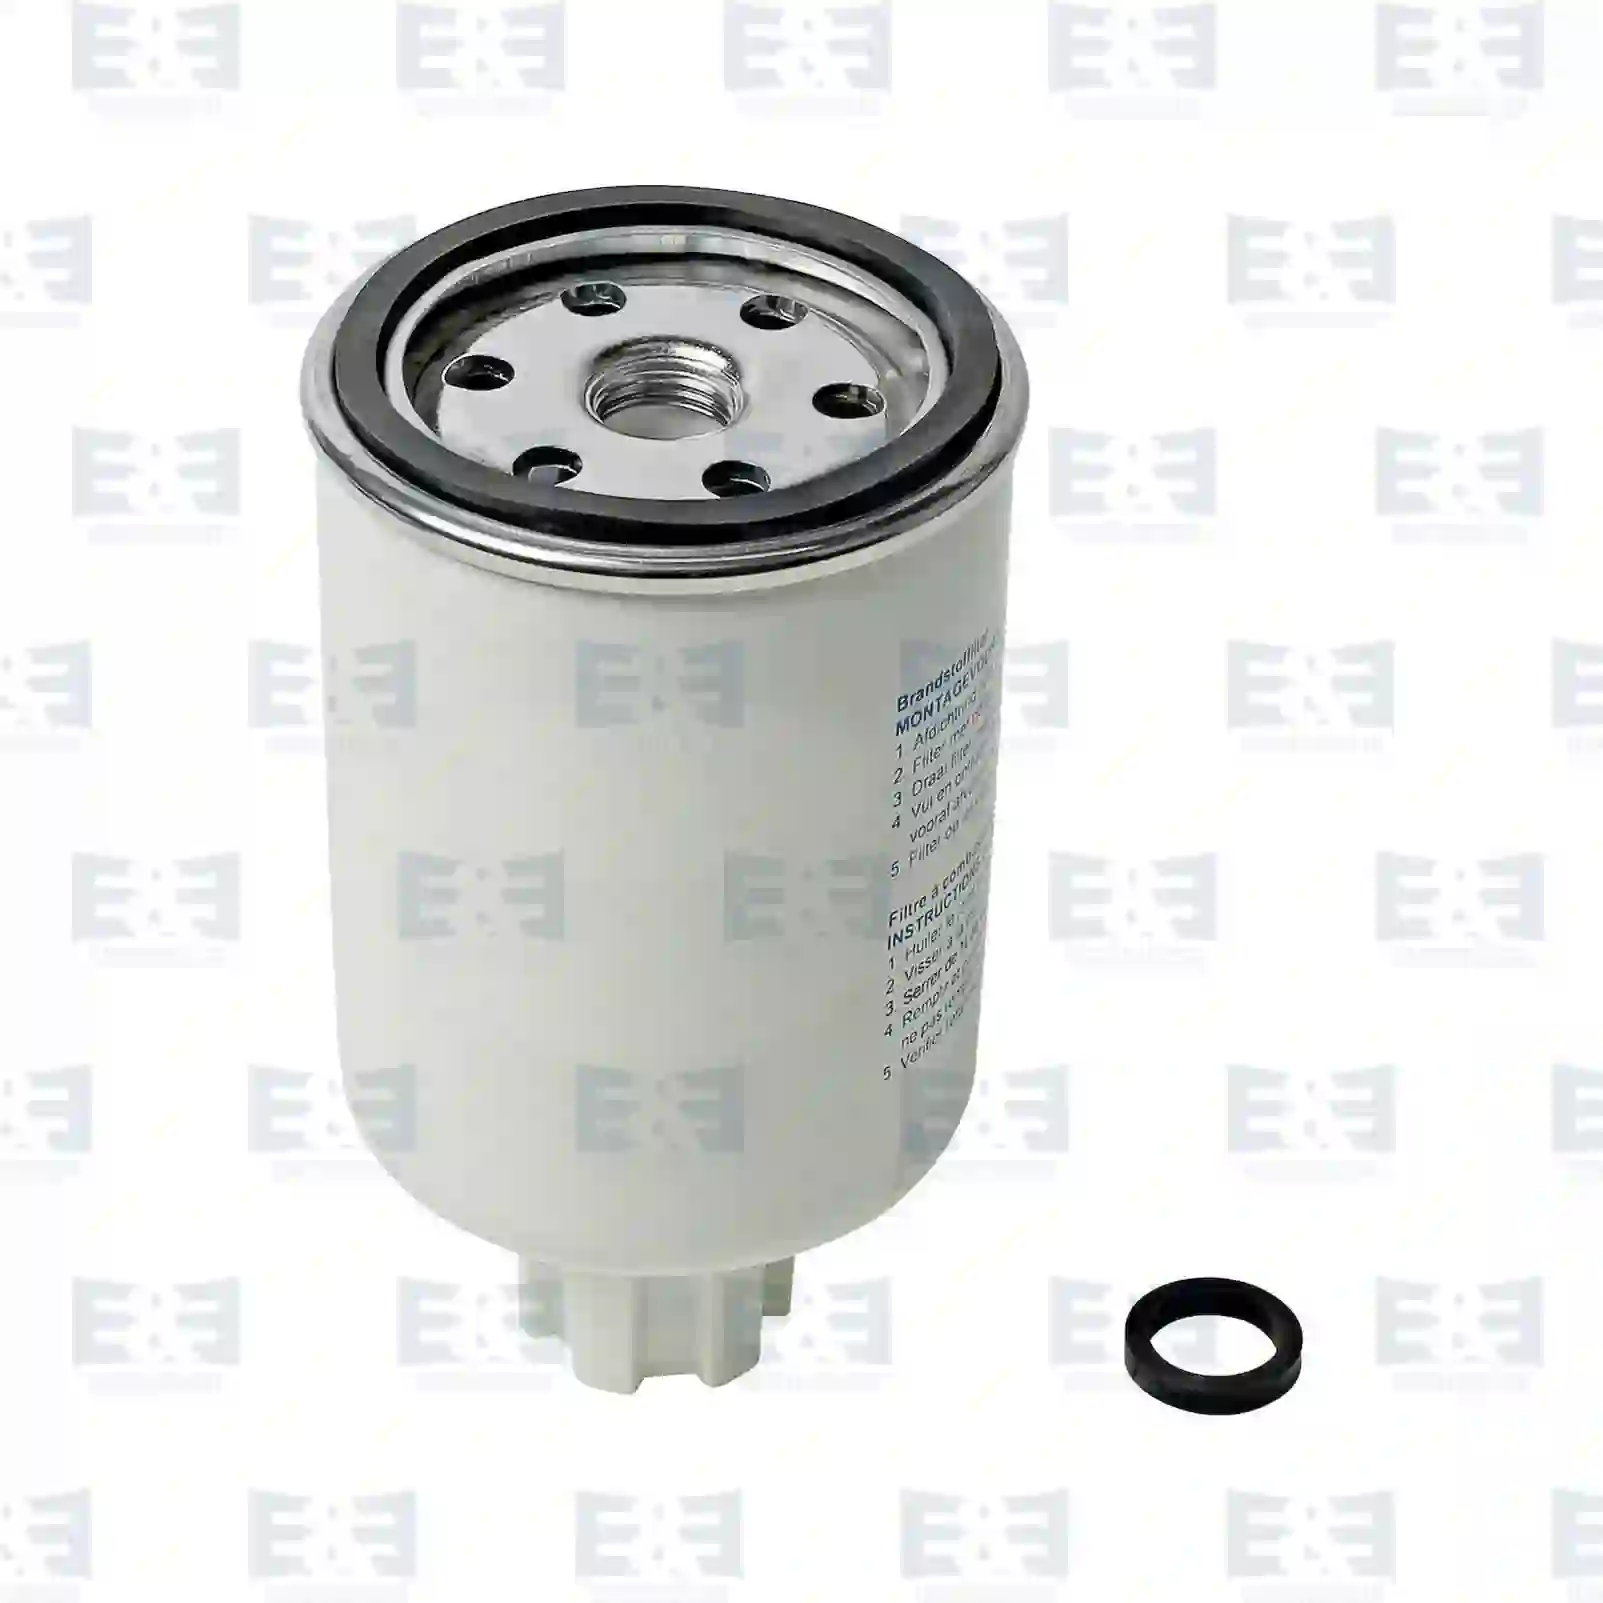 Fuel Filter, cpl. Fuel filter, EE No 2E2287762 ,  oem no:72515734, A4027606, 813566, 90166585, 1133493R1, 114545A1, 133493, 71104220, 84229389, 86990957, J286503, J286503MP, J931063, J931962, 190626, 190661, 1906A8, 1004559, 1492827, 3286503, 3931062, 3931064, 490160, CBU1177, CBU1251, CBU1920, CVU1177, ZZ11063, 2011055, 01902138, 71736116, 73175965, 73175973, 3843760, 5018034, 5023923, DNP550248, 90166585, 90166858, 93891769, 25011999, 9414992533, 9437990108, 26561118, 01902138, 08122353, 1902138, 3903202, 51125030026, 0940000604, 3218794R91, 04785601, 71104220, 73175965, 84229389, 86990957, 190626, 190661, 1906A8, 90111090900, 5001850947, 83129993490, 15270824, 1257201, 3134055, 829993, ZG10129-0008 E&E Truck Spare Parts | Truck Spare Parts, Auotomotive Spare Parts